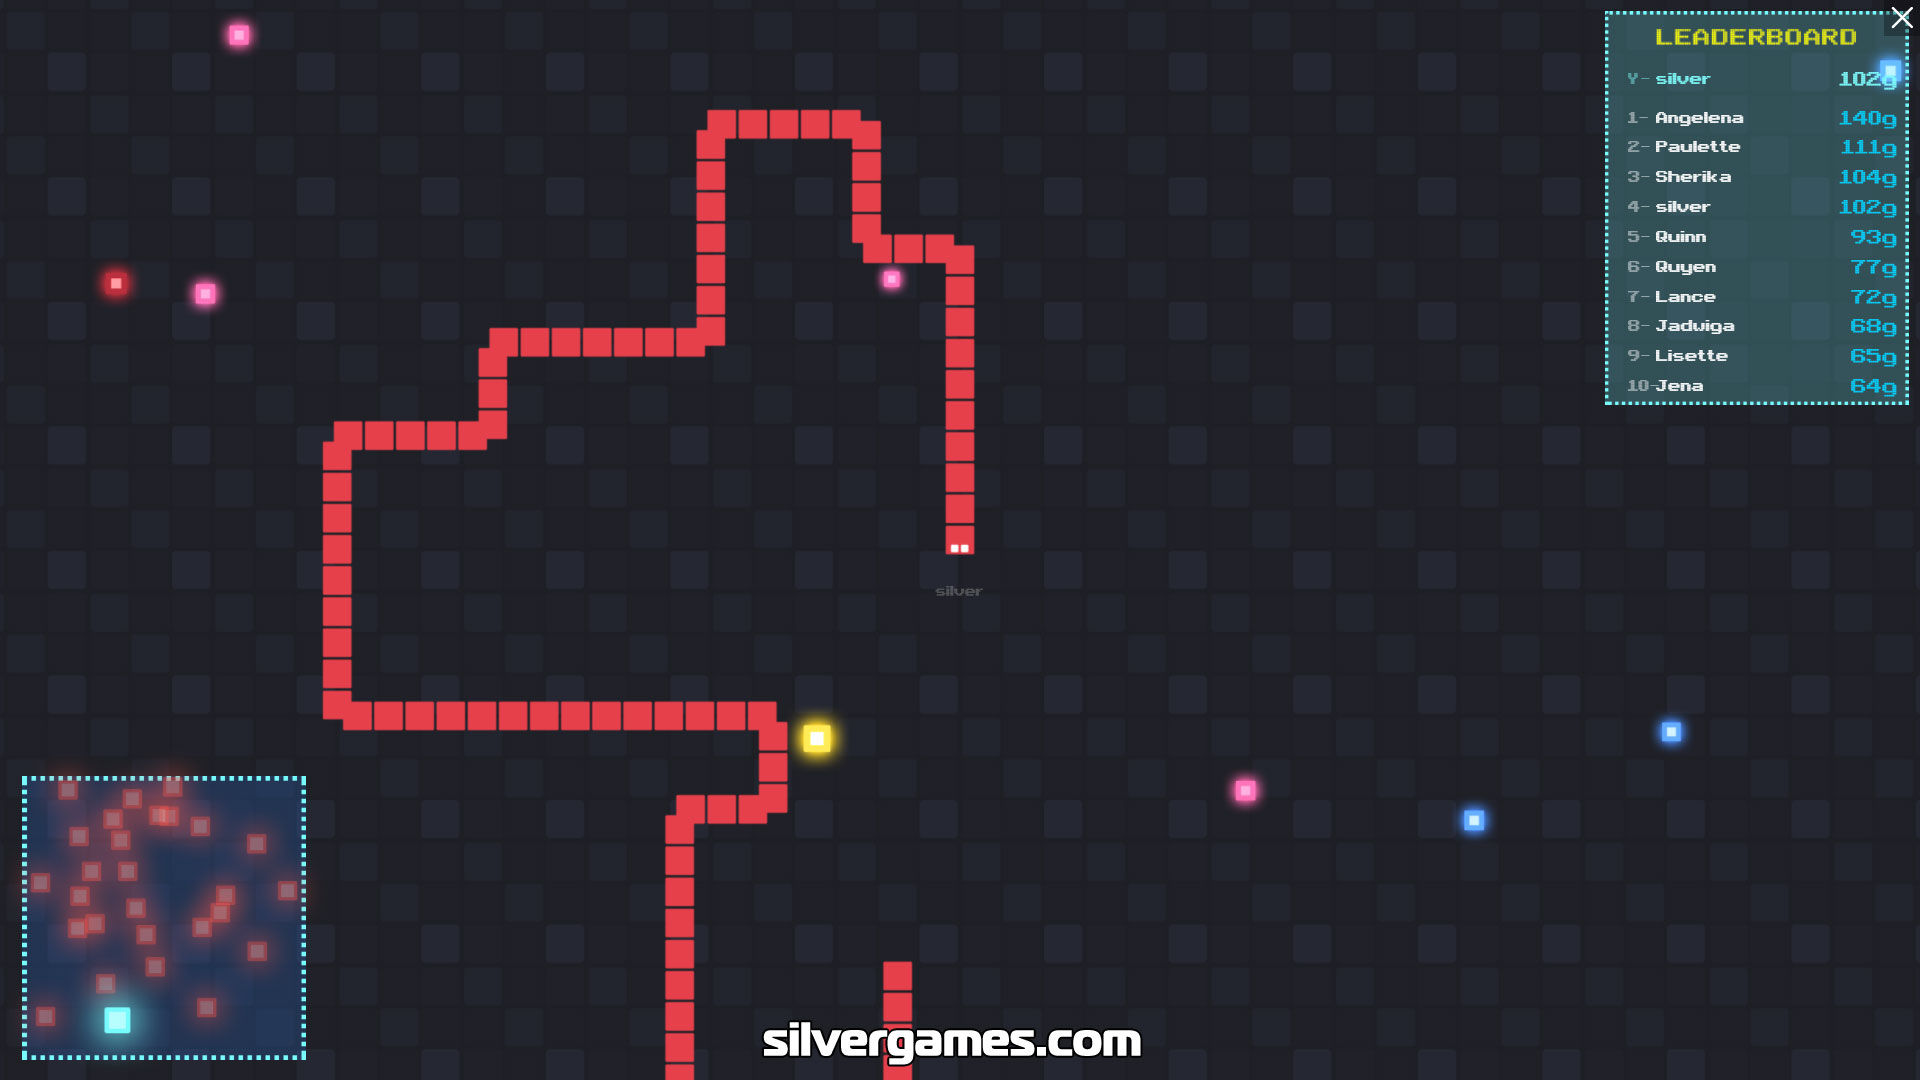 Play Snake Online - Free Classic Snake Game